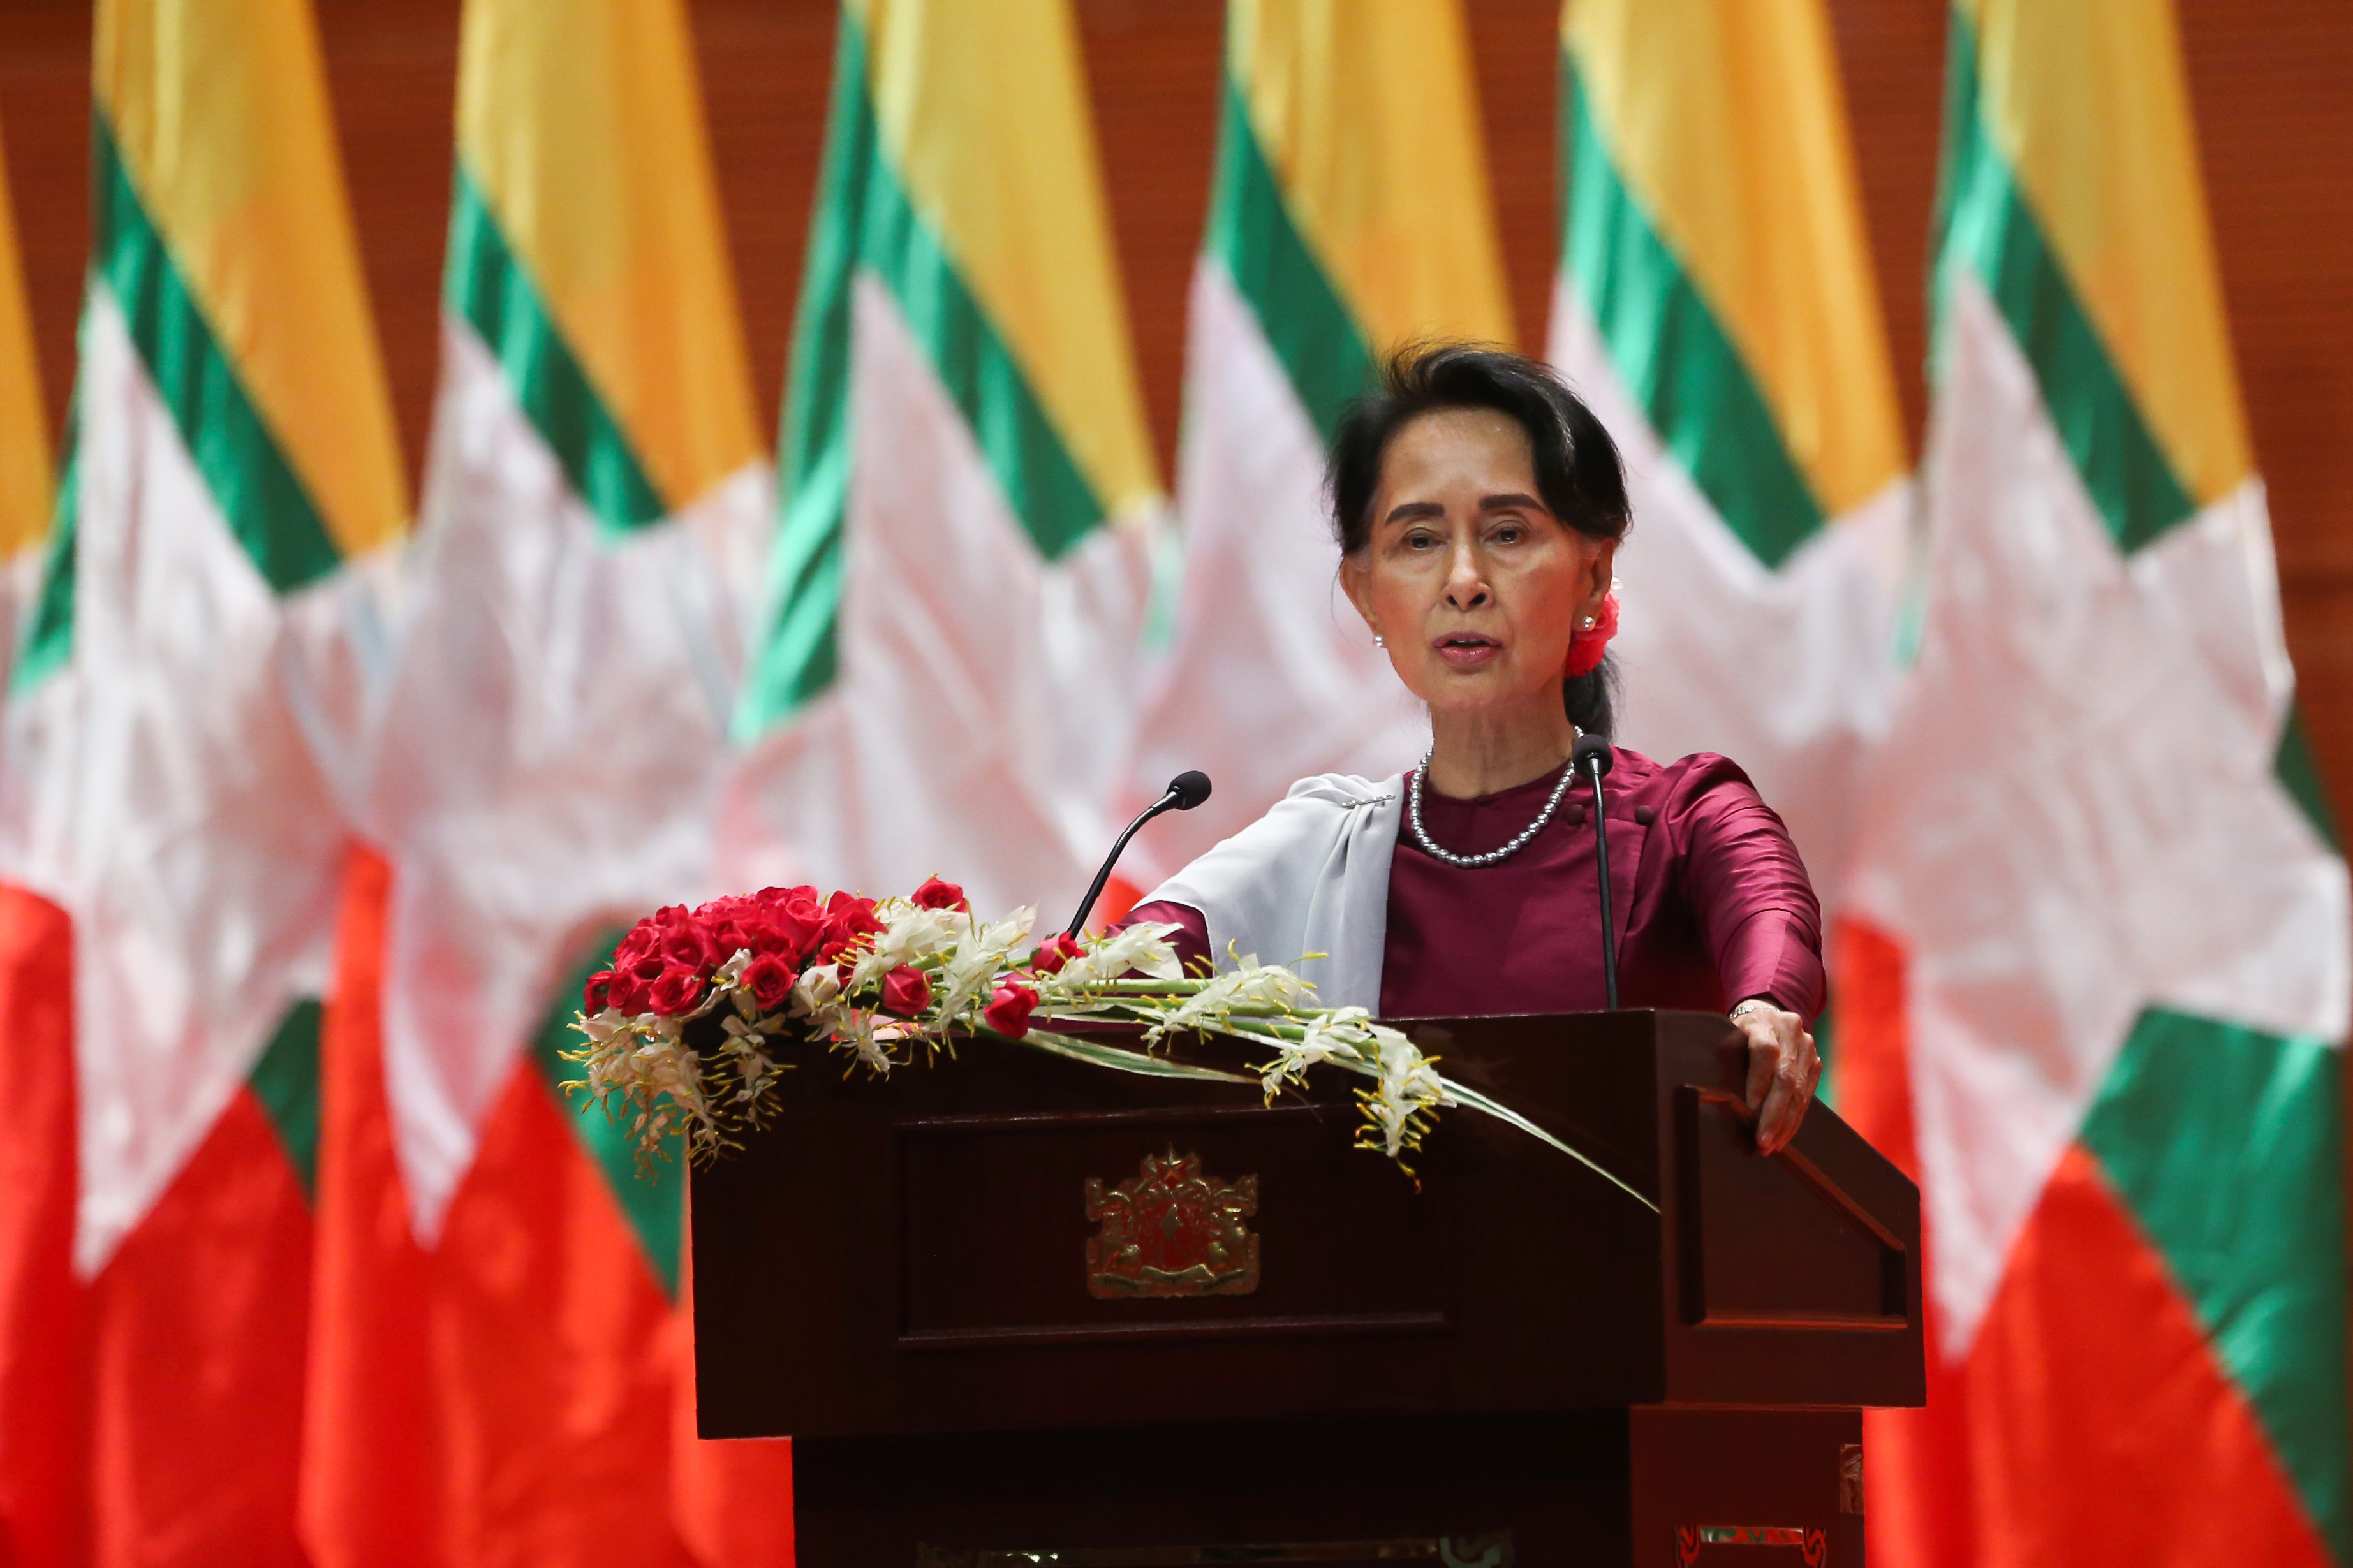 Myanmar's State Counsellor Aung San Suu Kyi delivers a national address in Nay Pyi Daw on Sept. 19, 2017. (Ye Aung Thu—AFP/Getty Images)